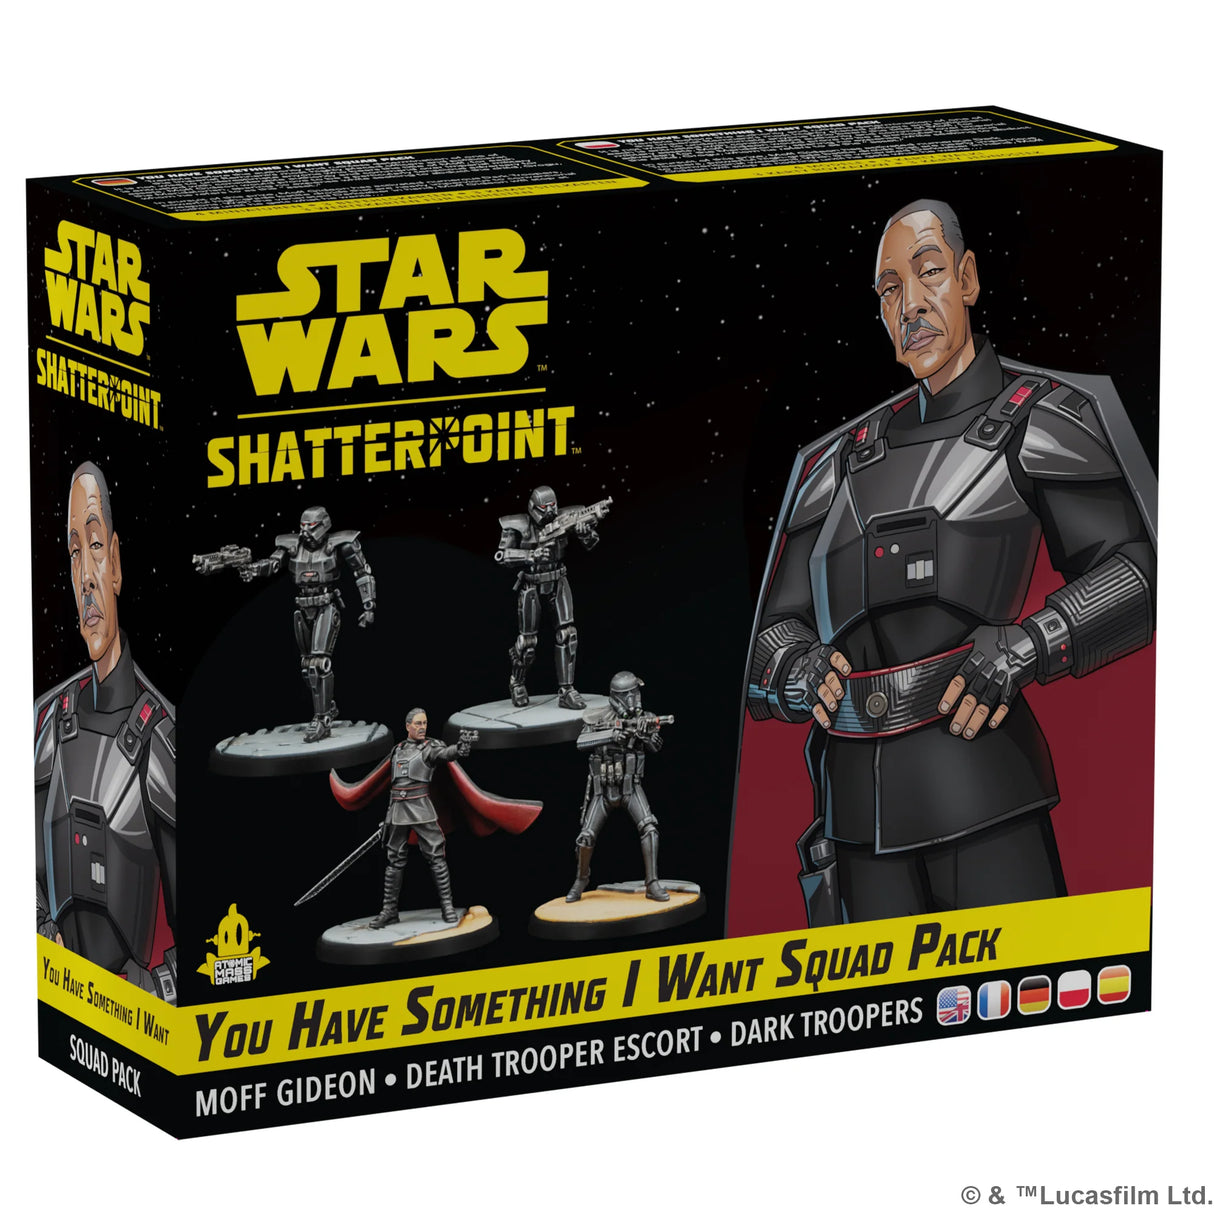 Star Wars Shatterpoint: You Have Something I Want Squad Pack (Moff Gideon)